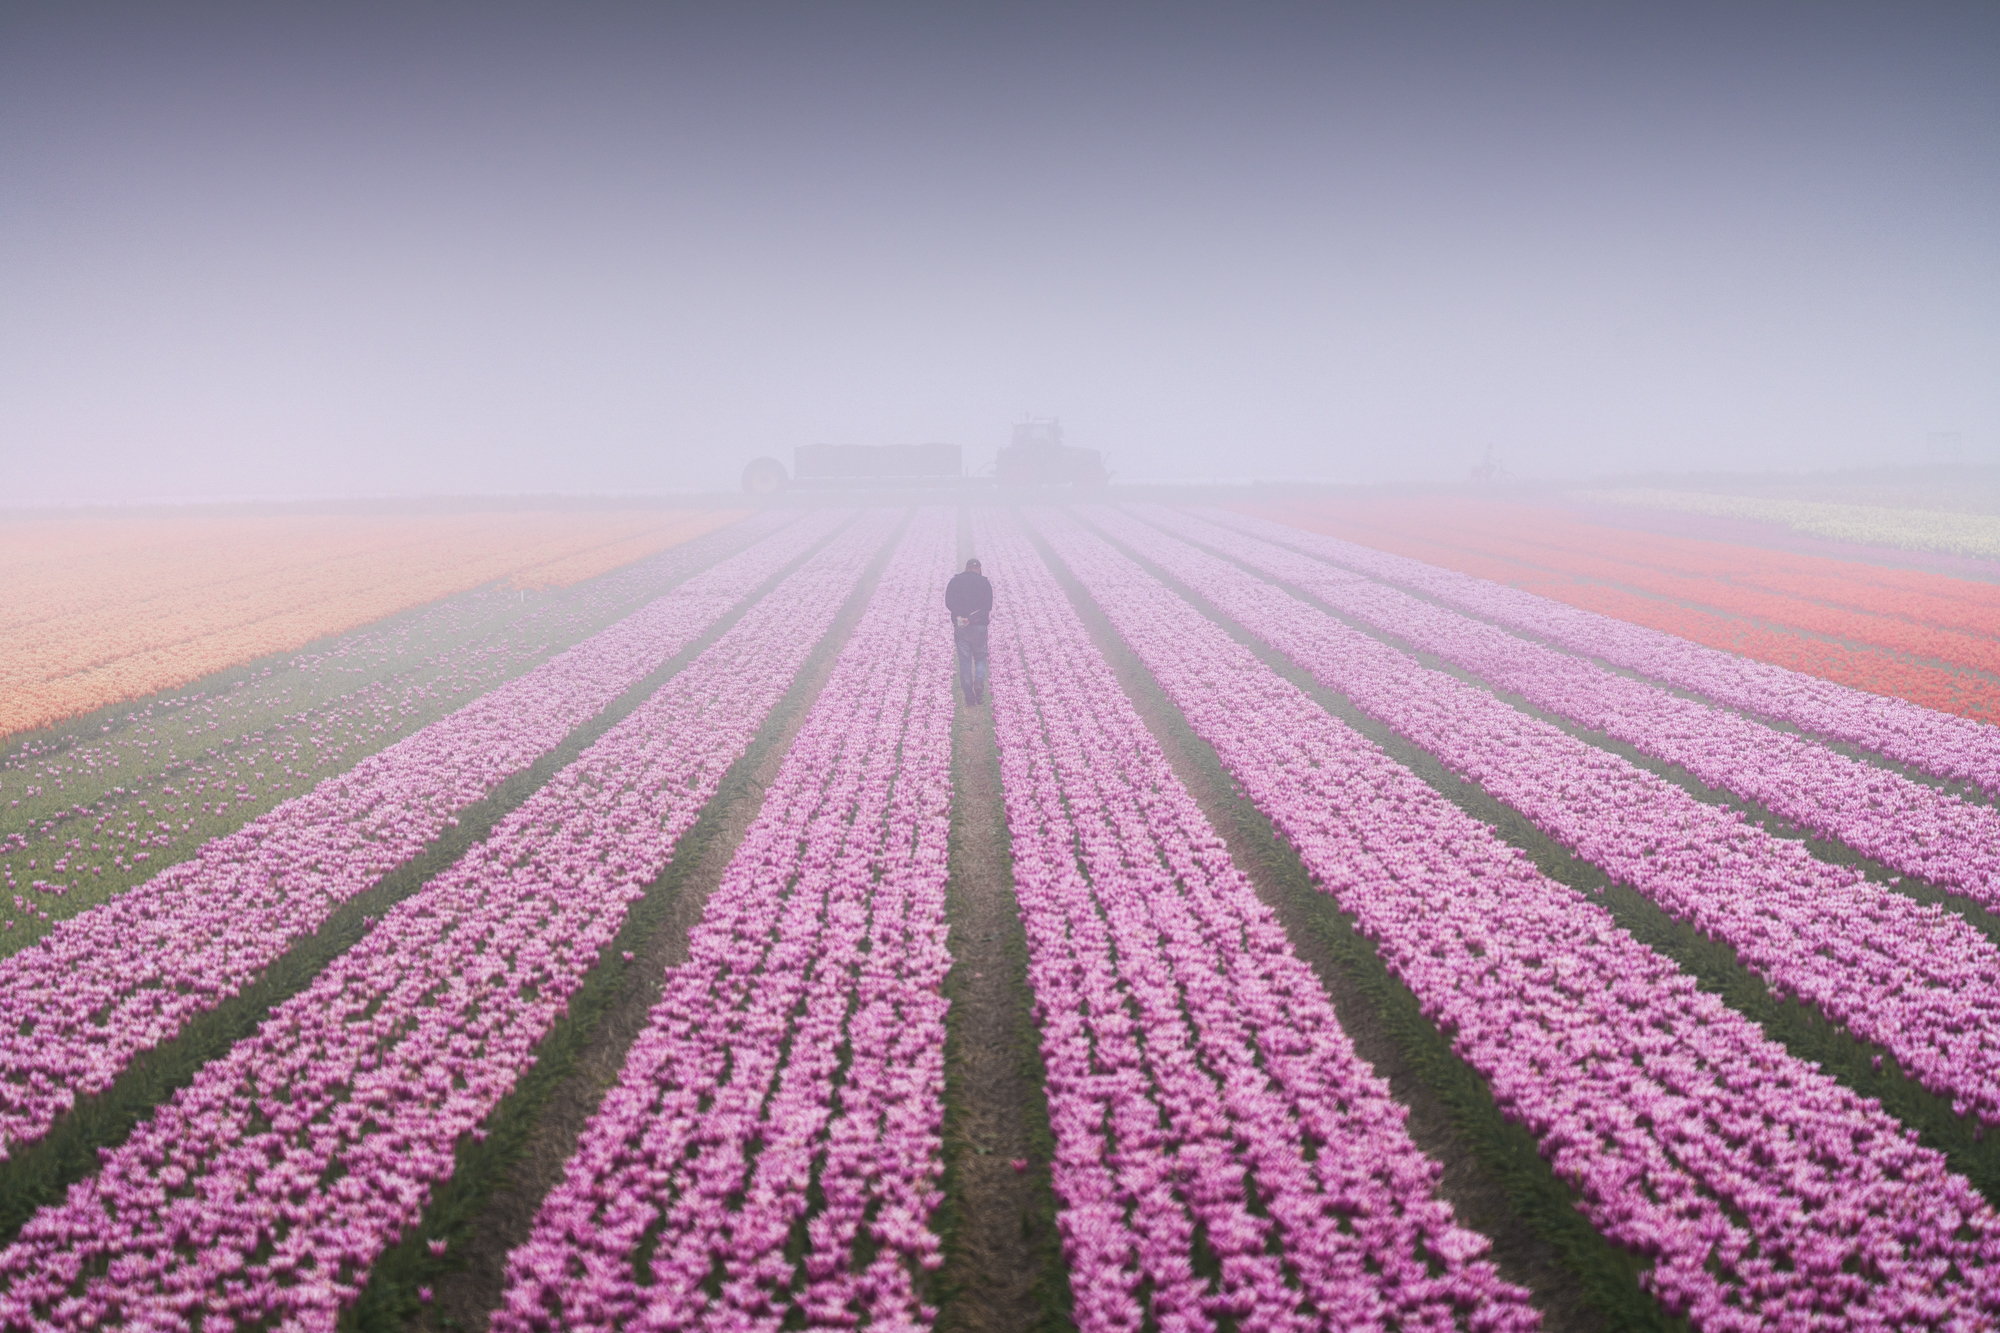 A farmer walks through the lines of tulips, looking for tulips that don't belong there. He will remove them all before he harvests the bulbs.